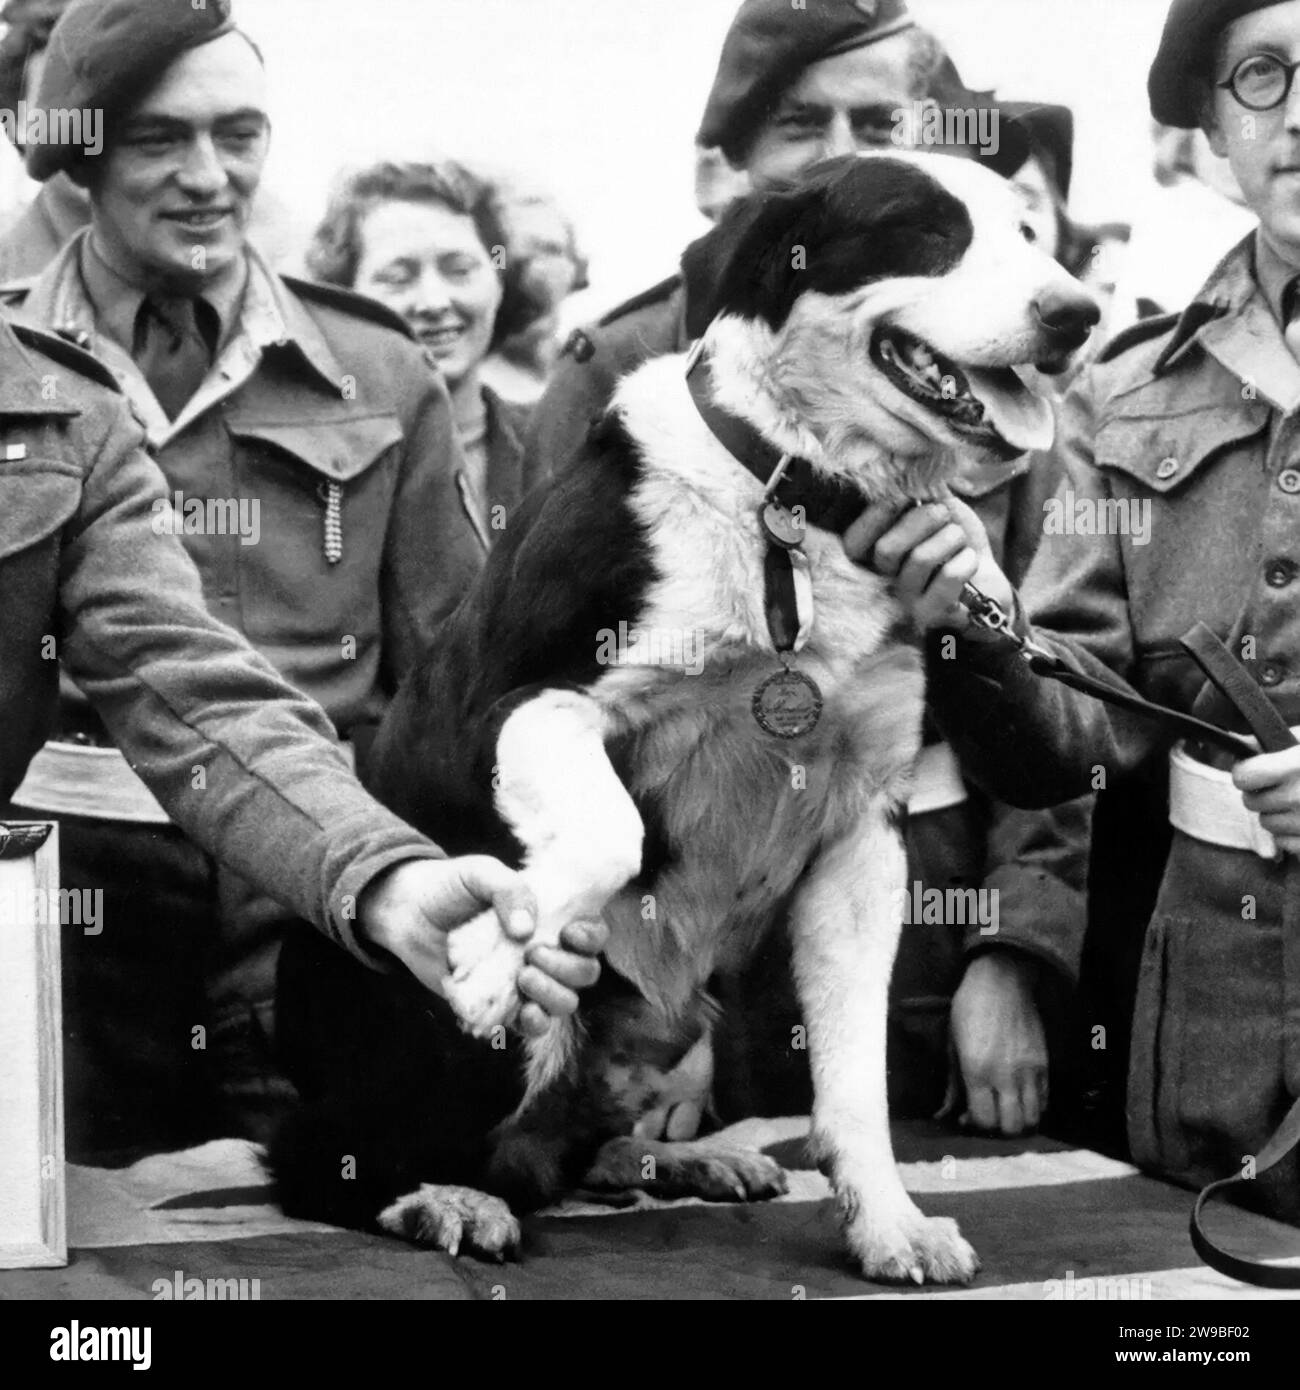 The Dickin Medal. The PDSA Dickin Medal is awarded to animals for conspicuous gallantry or devotion to duty while serving in military conflict. Here,  Rob the Collie is receiving his Dickin Medal in 1945. Rob made over 20 parachute descents during the North African Campaign; serving with the Special Air Service . Stock Photo